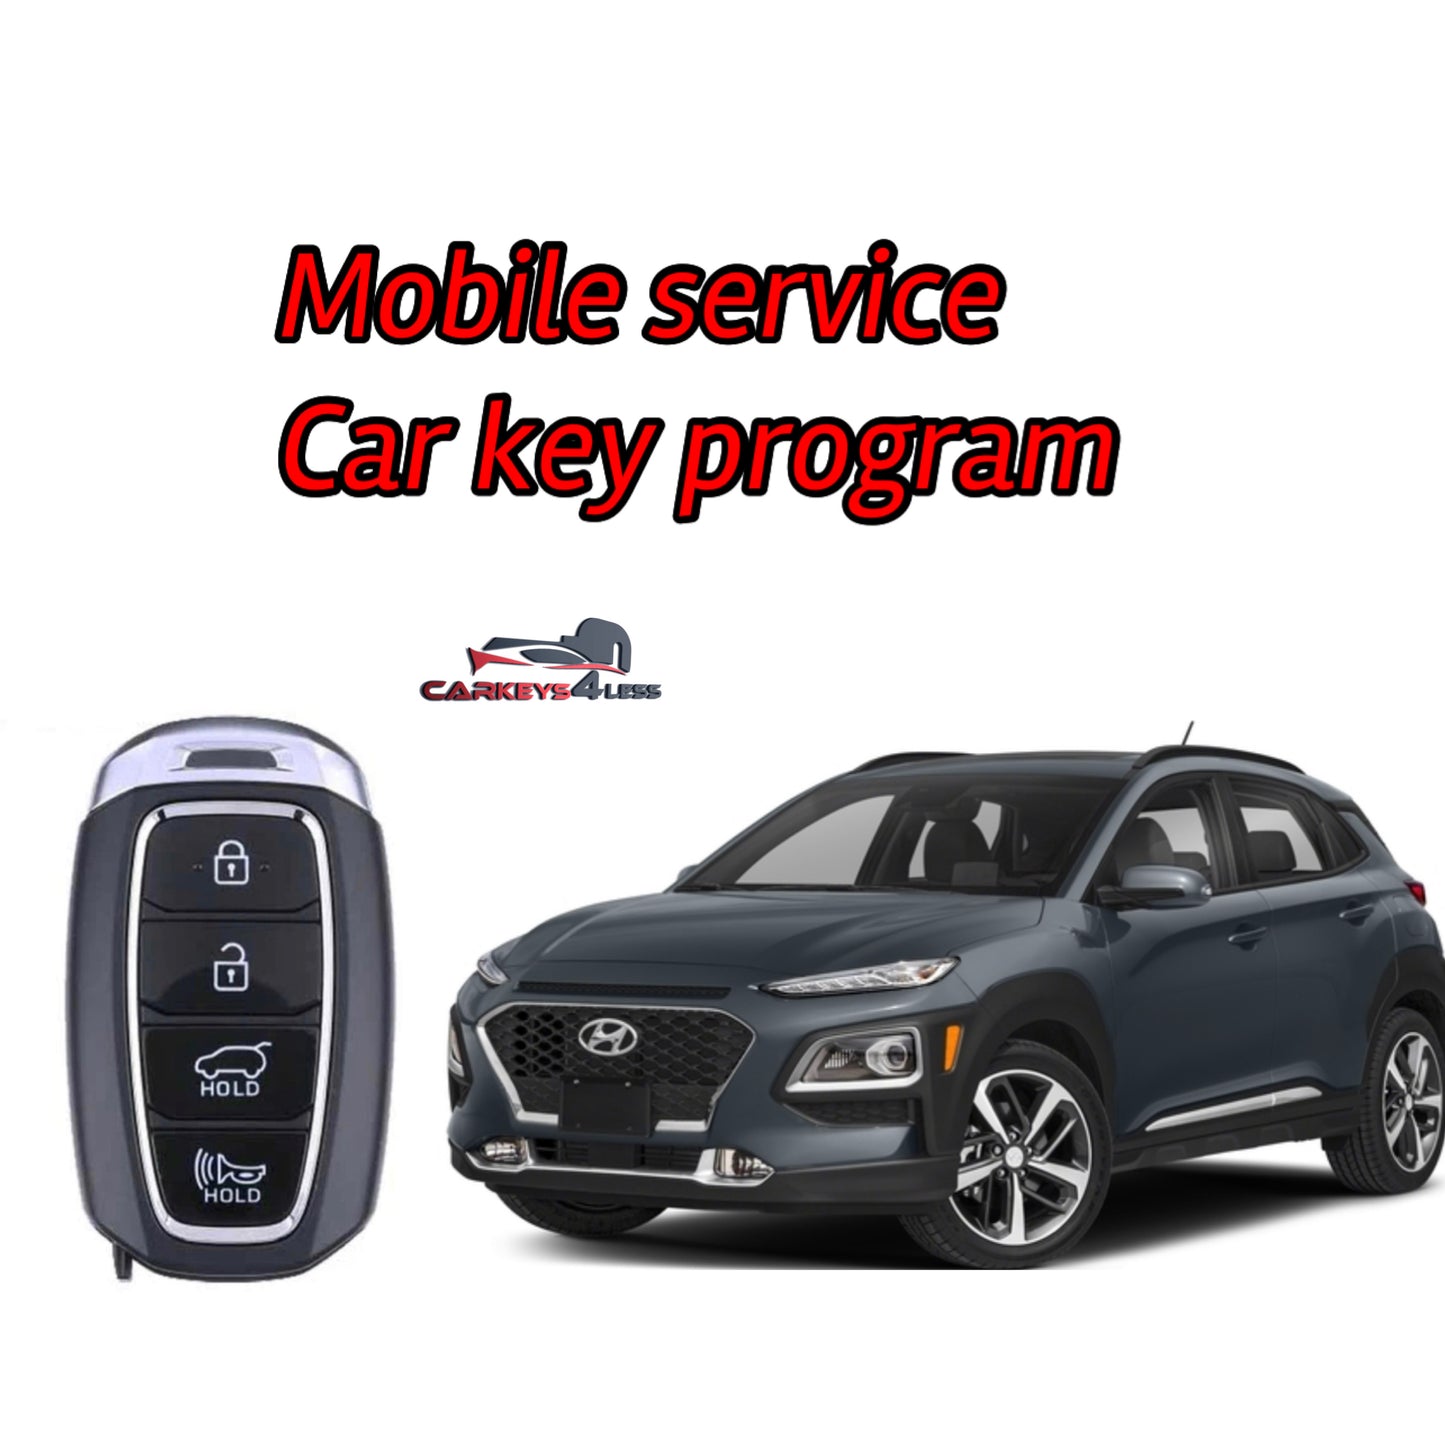 Mobile service for an oem refurbished car key replacement for Hyundai